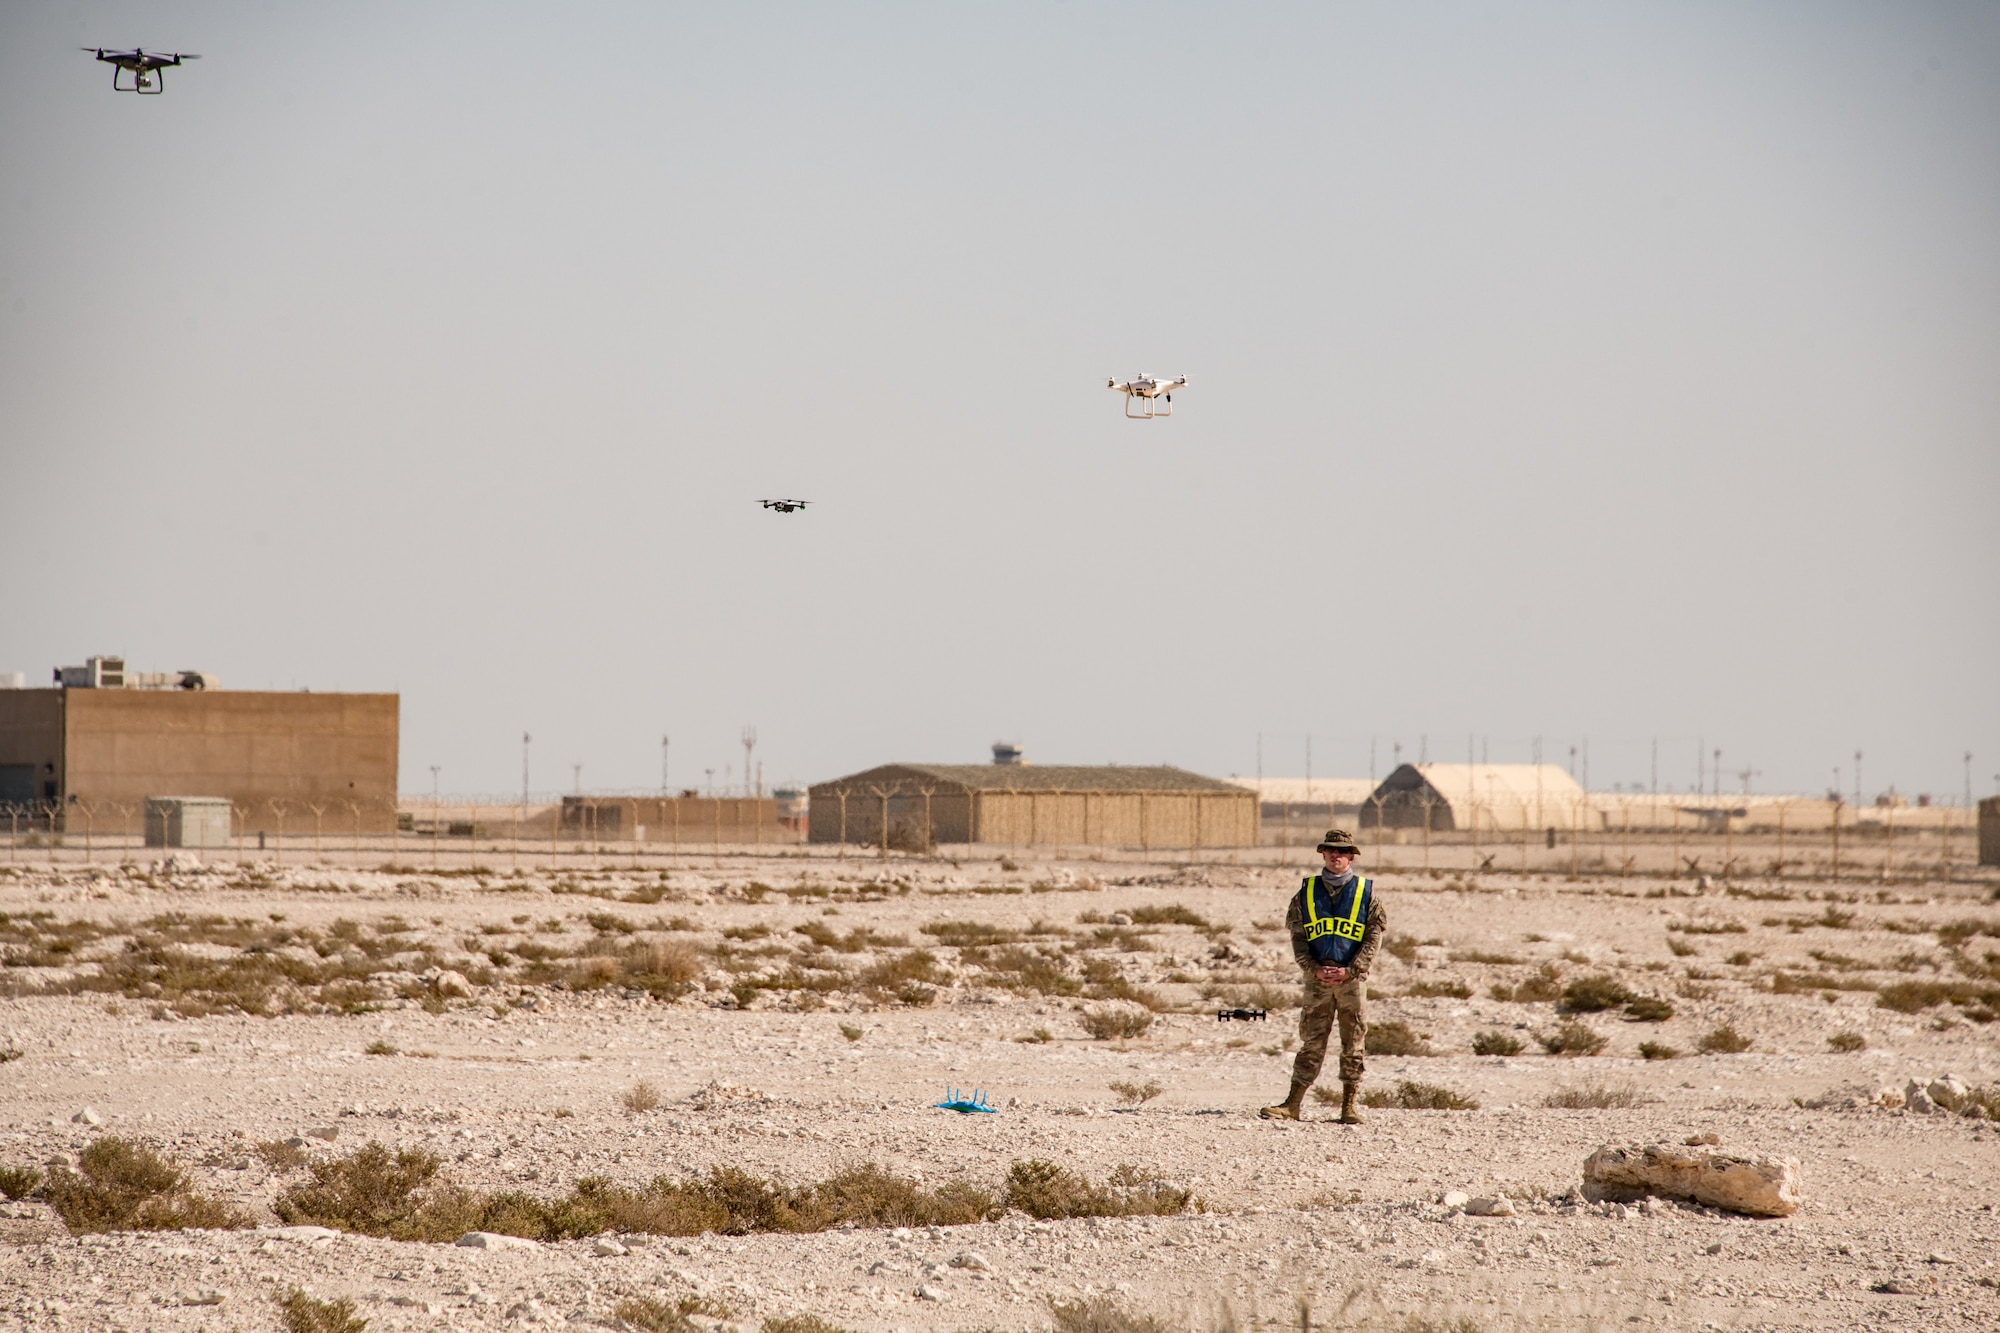 An Airman stands in a field surrounded by drones